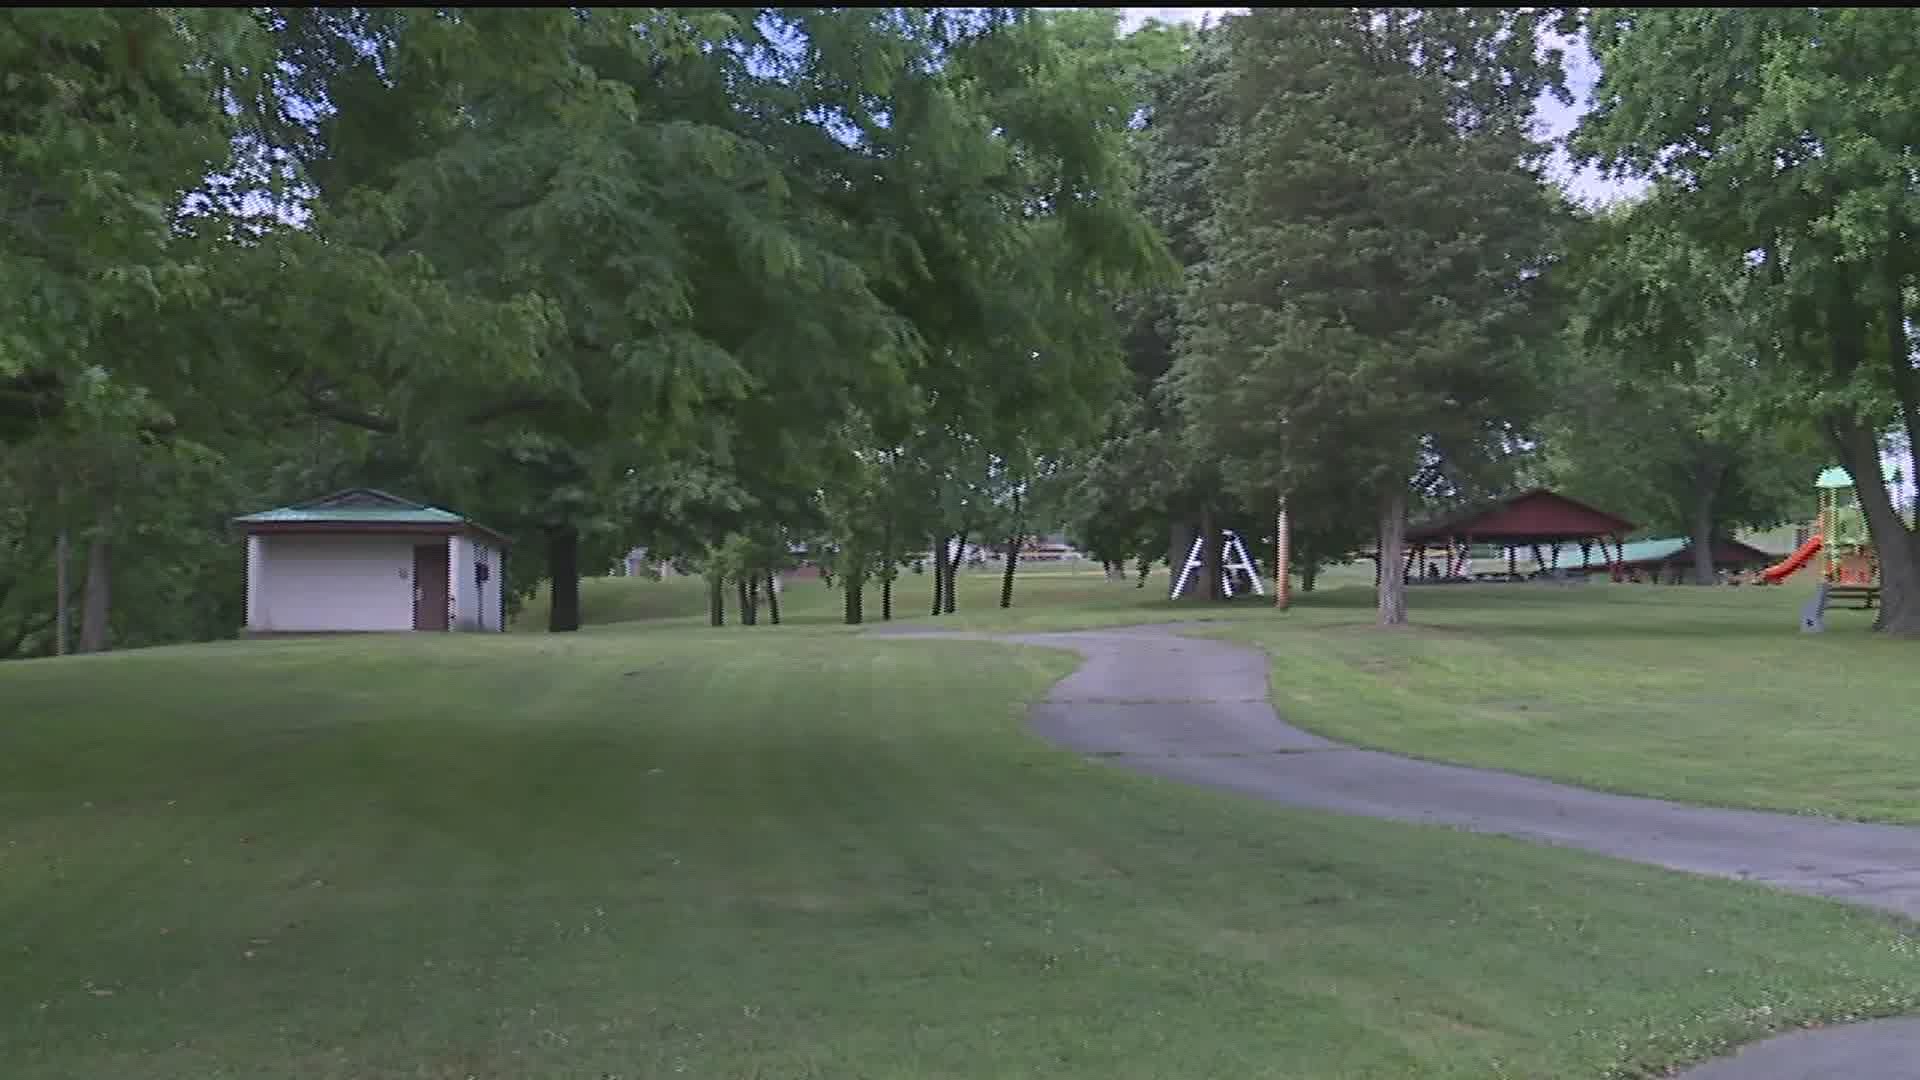 Two Schuylkill County men are accused of dumping the body of a man in a Dauphin County Park